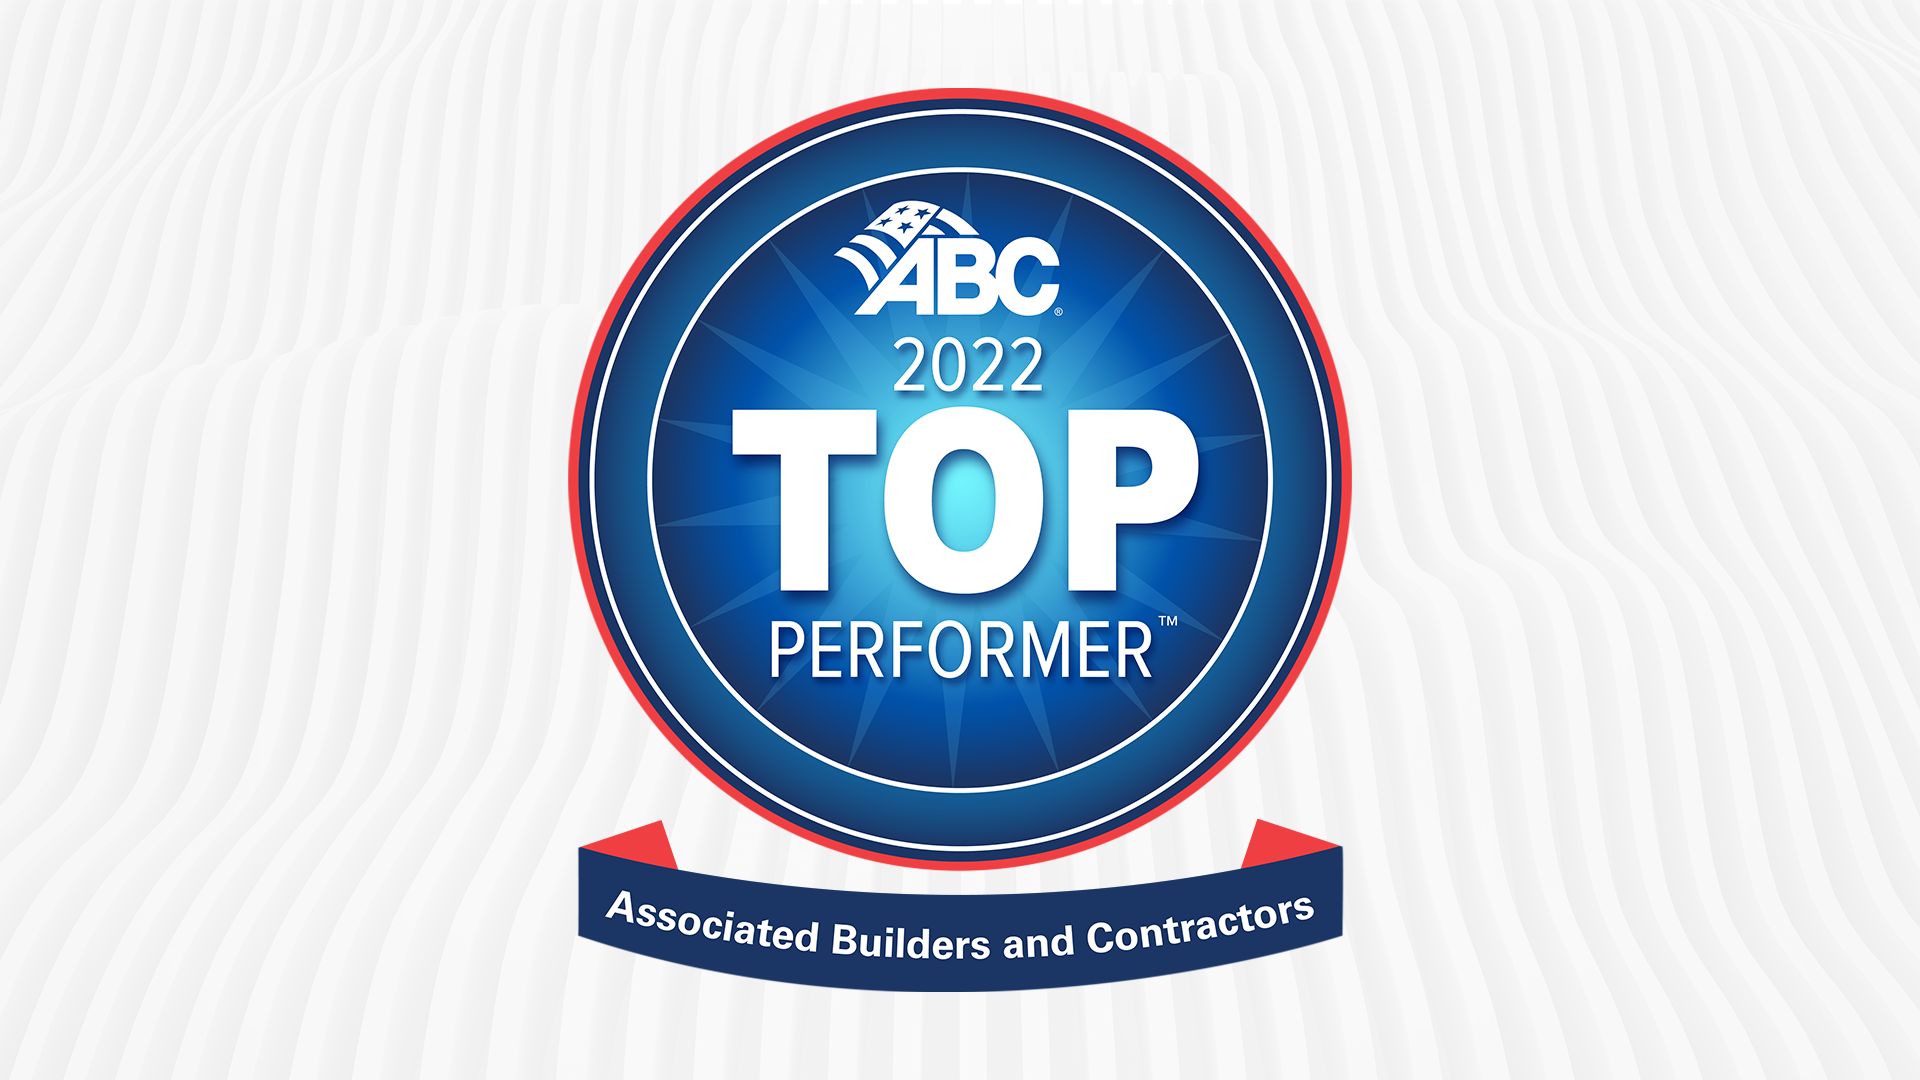 ABC Top 10 Performer Featured Image 2022